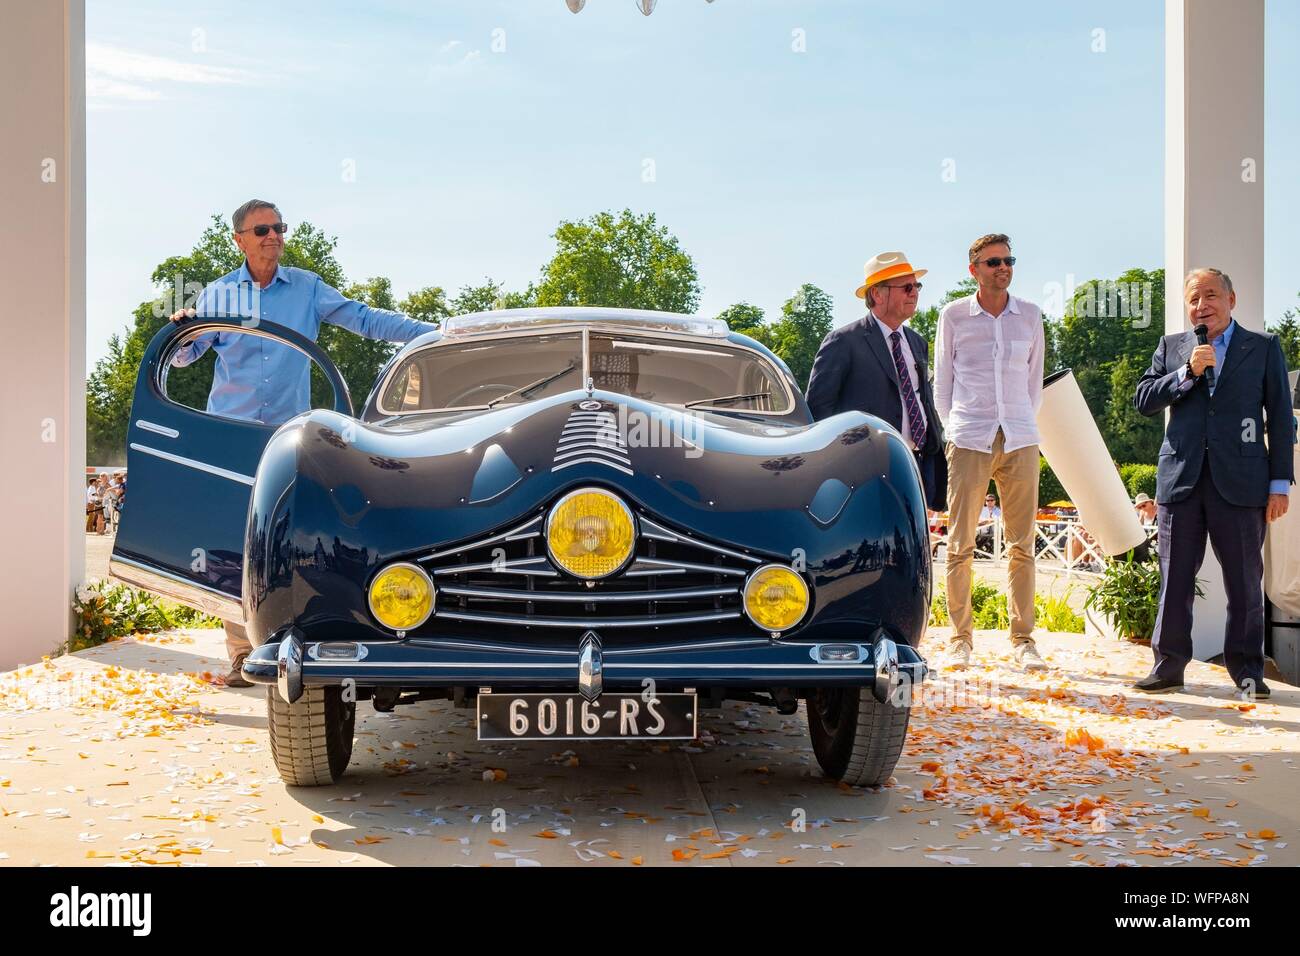 France, Oise, Chantilly, Chateau de Chantilly, 5th edition of Chantilly Arts & Elegance Richard Mille, a day devoted to vintage and collections cars, Best-of show (post-war), the Talbot Lago T26 Grand Sport Coupe Stock Photo